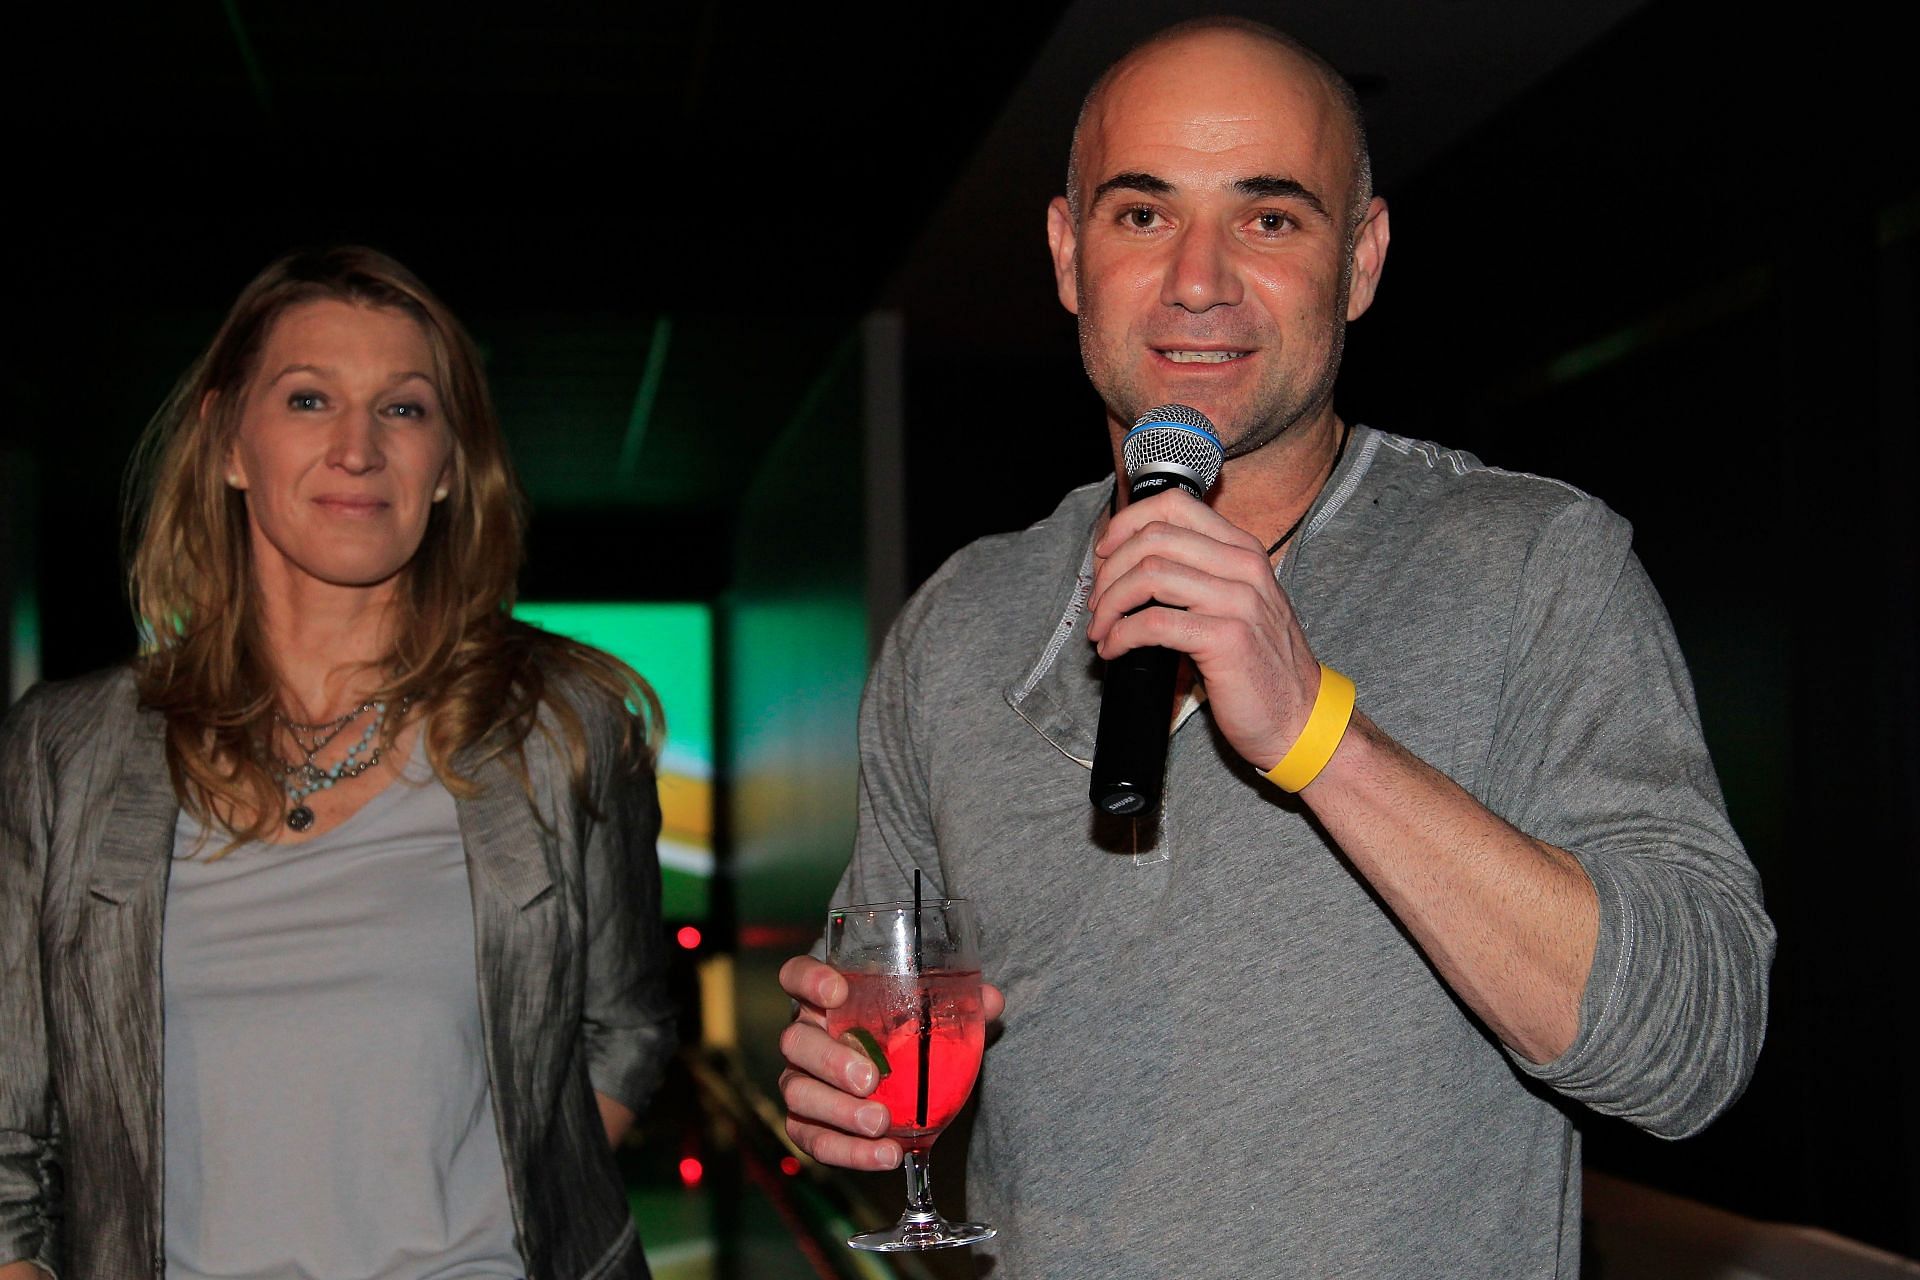 Steffi Graf and Andre Agassi in 2011